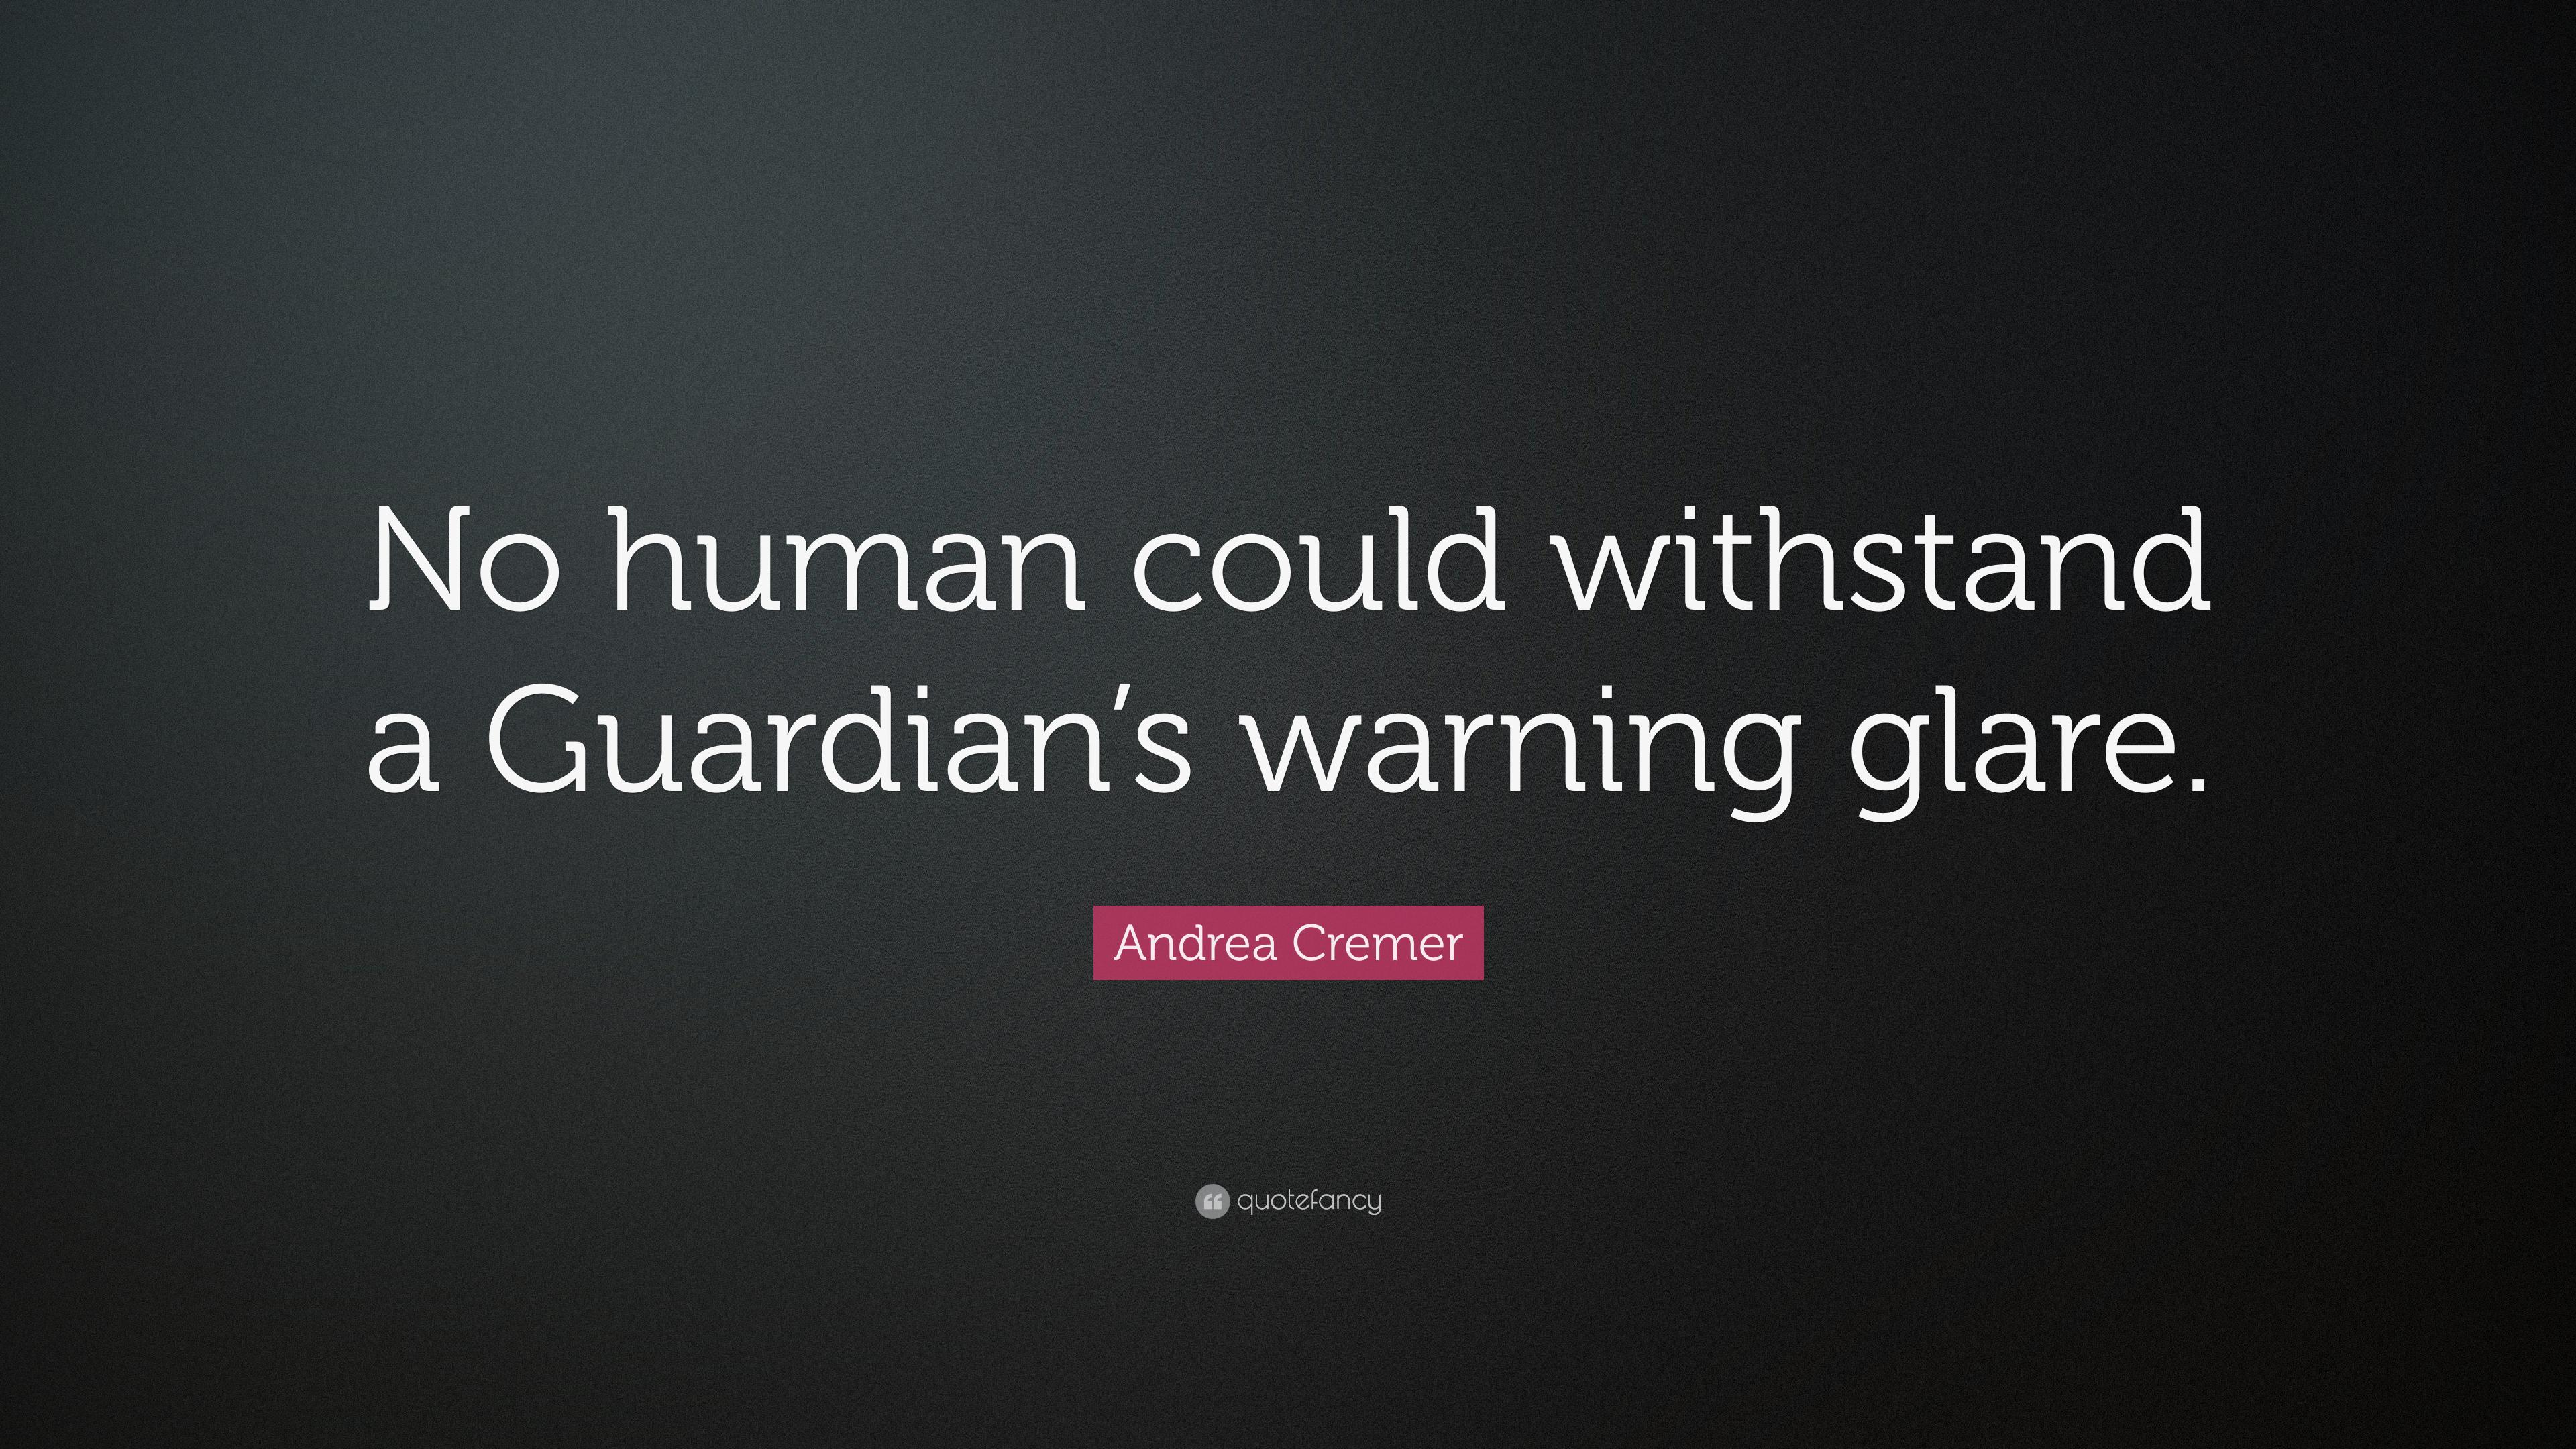 Andrea Cremer Quote: “No human could withstand a Guardian's warning